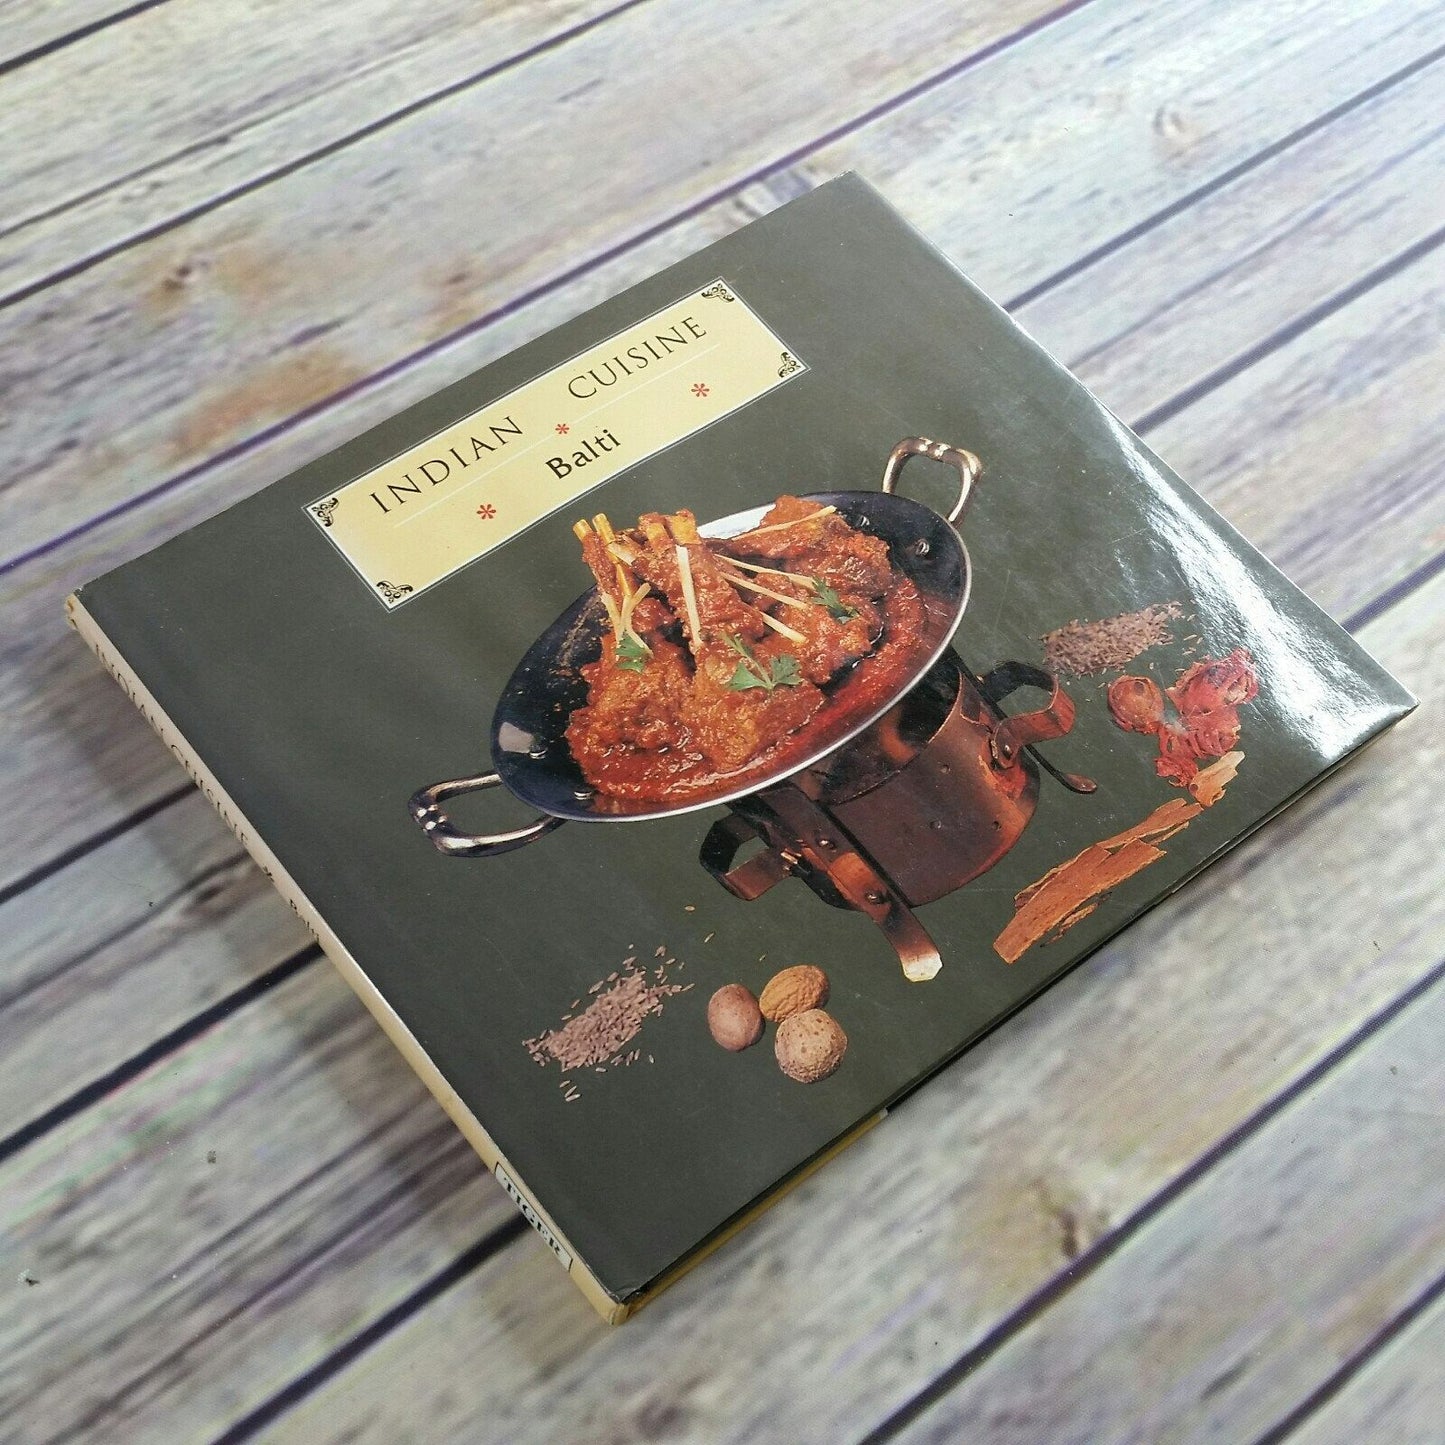 Vtg Indian Cookbook Recipes Indian Cuisine Balti 1996 Hardcover with Dust Jacket Indian Food Recipes Lustre Press